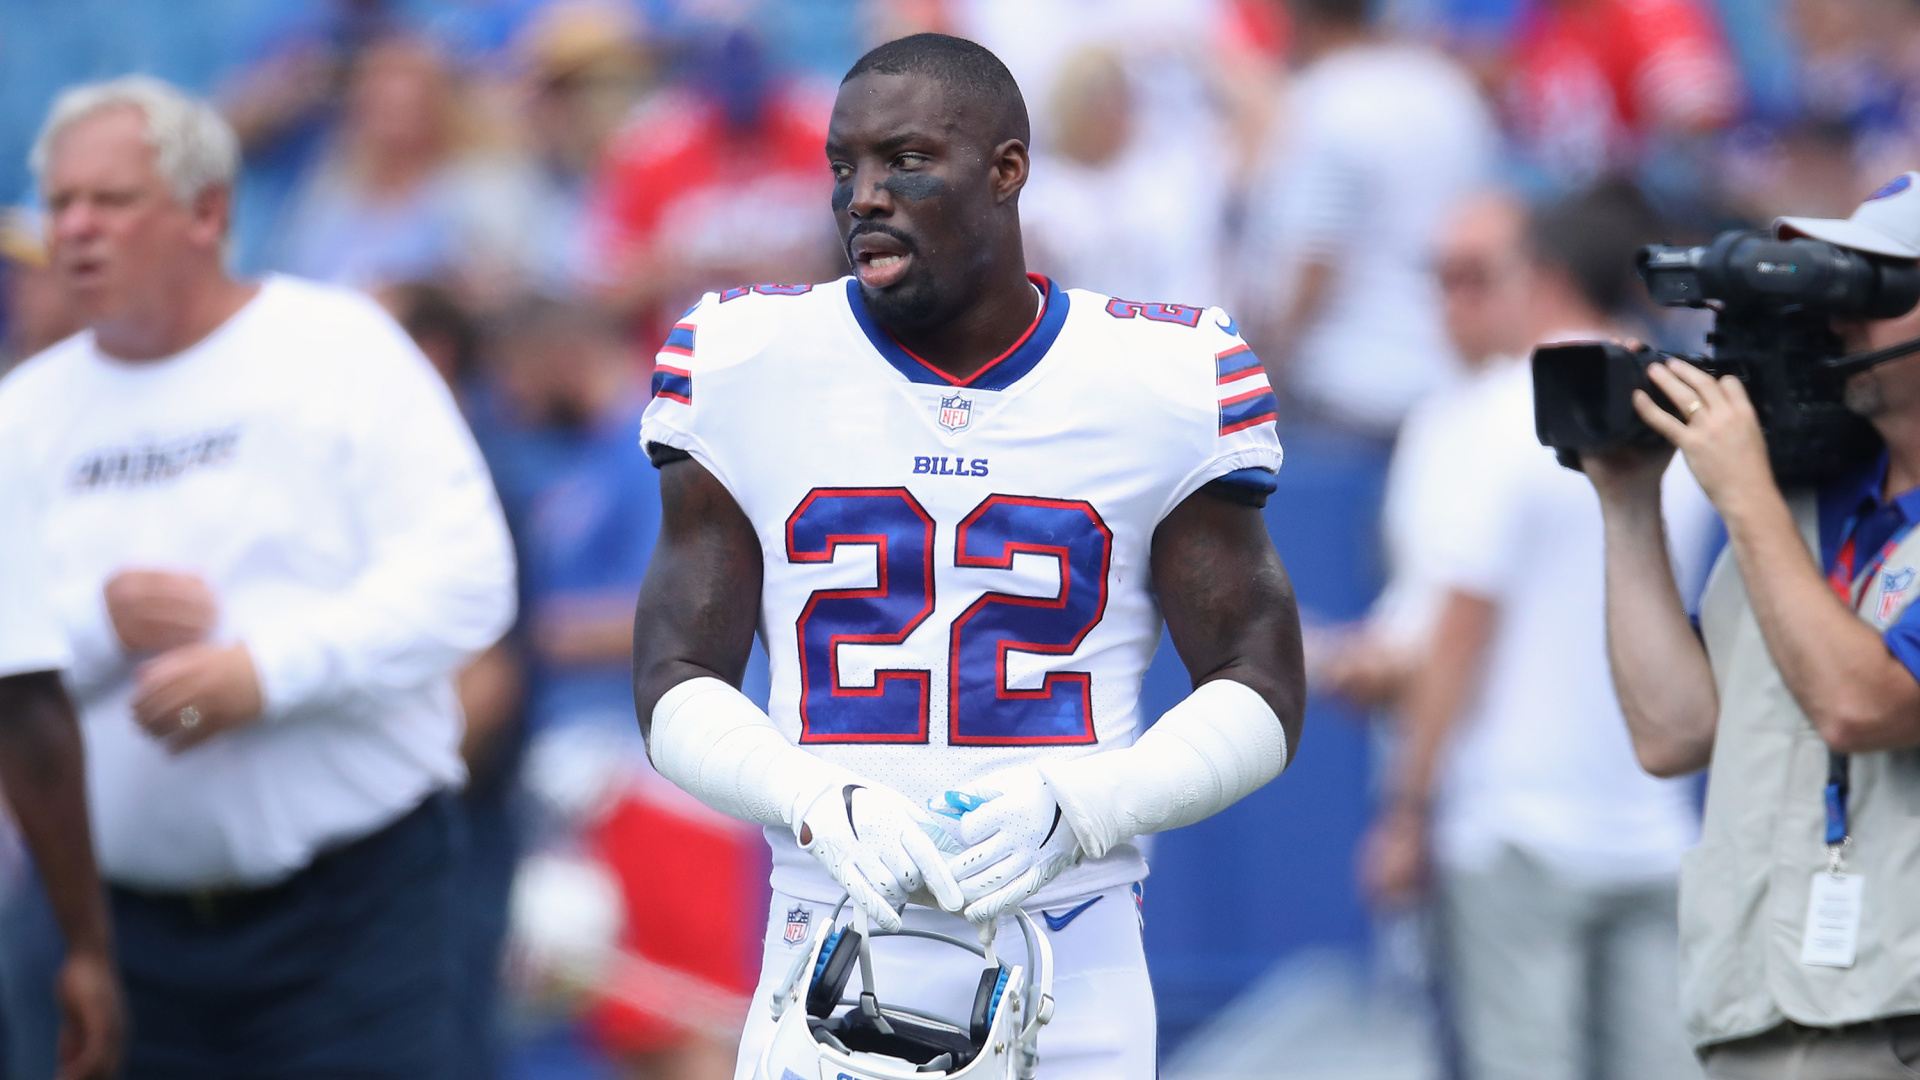 <p>American football player Vontae Davis, former NHL and Dolphins player, was found dead at his home in Florida. Although the causes of death have not been revealed, the police have ruled out foul play. He was 35 years old.</p>